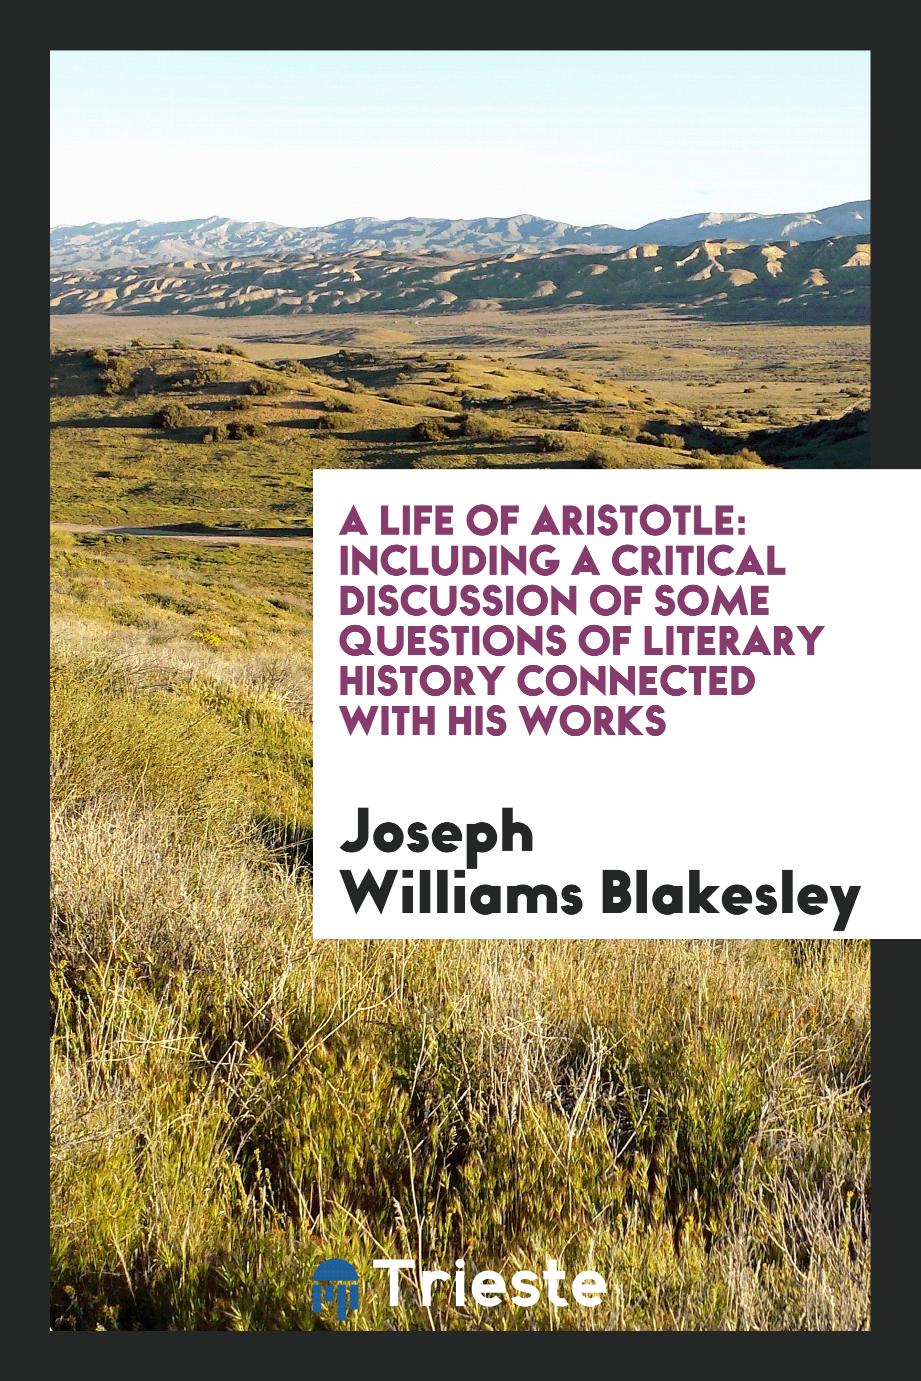 A Life of Aristotle: Including a Critical Discussion of Some Questions of Literary History Connected with His Works